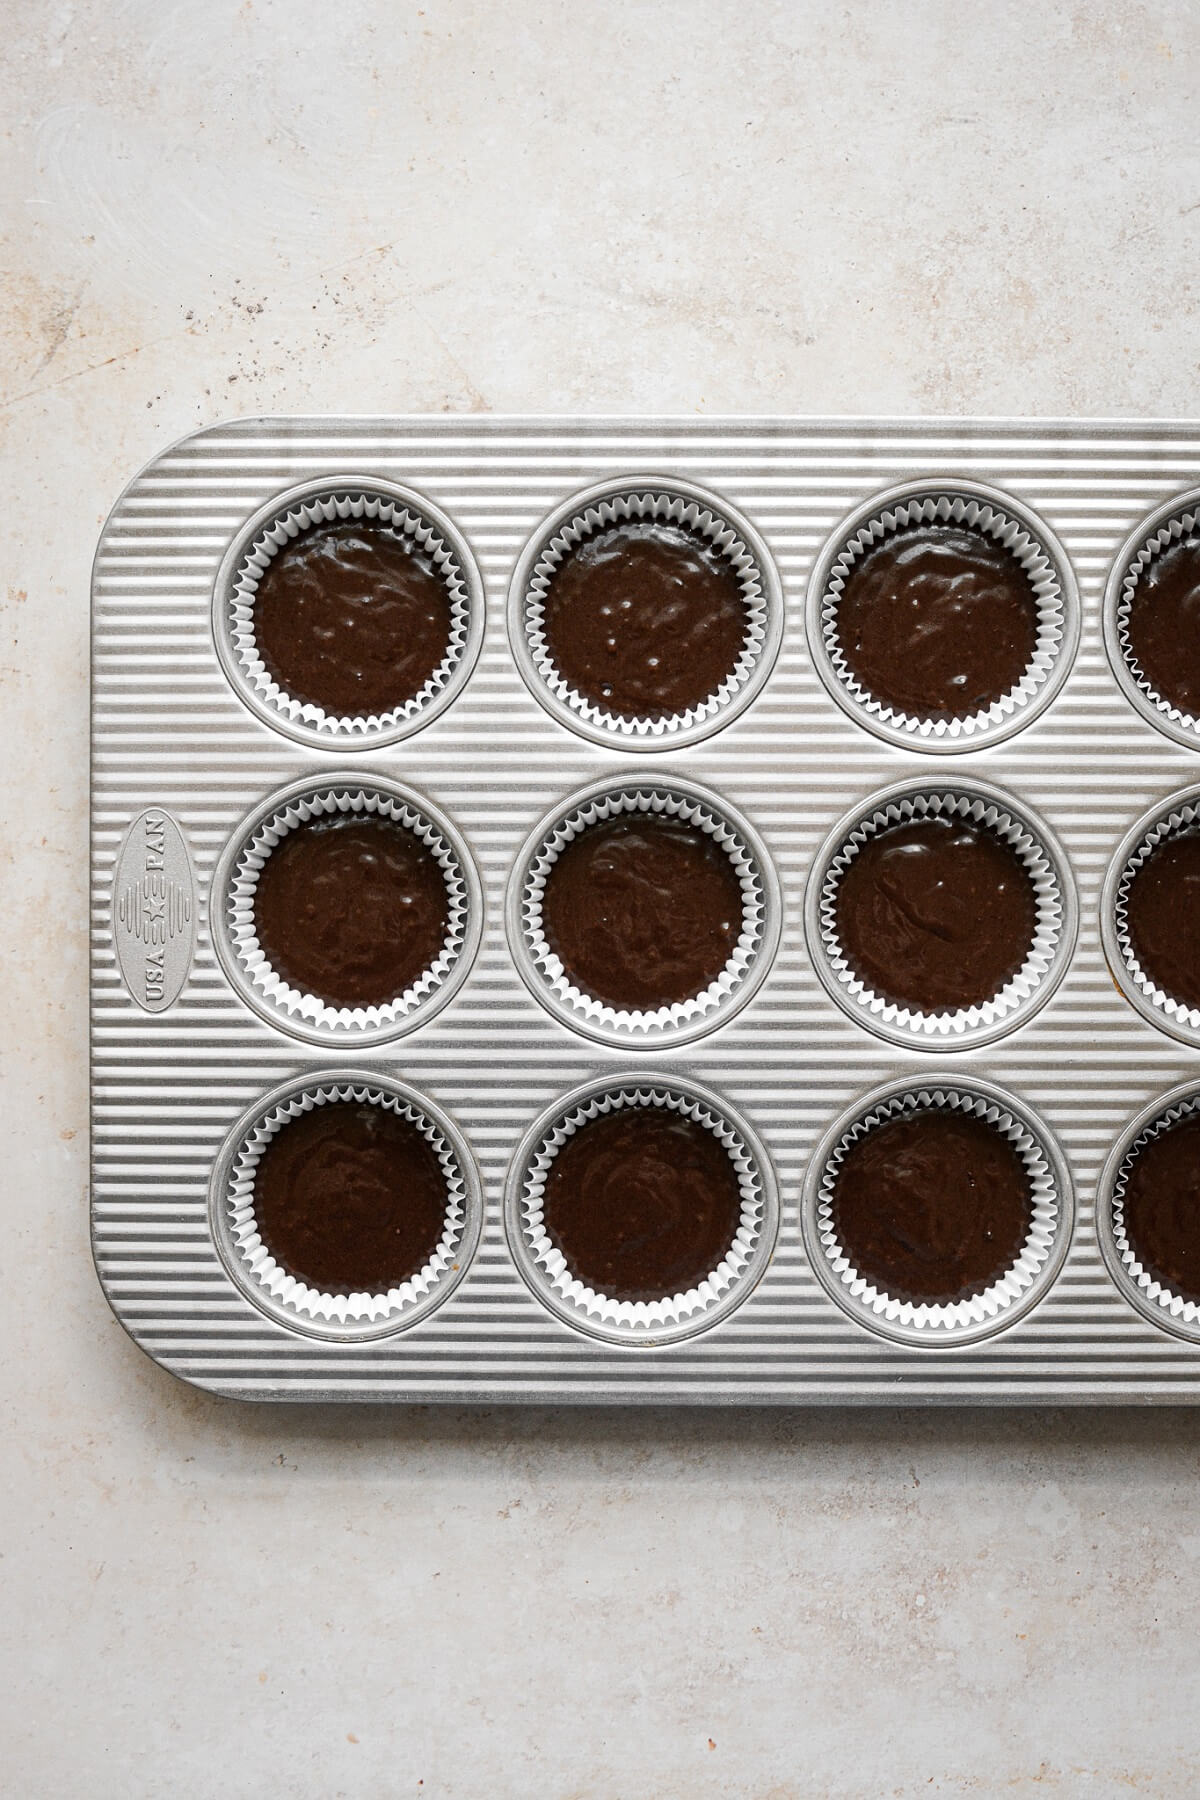 Chocolate cupcakes about to be baked.